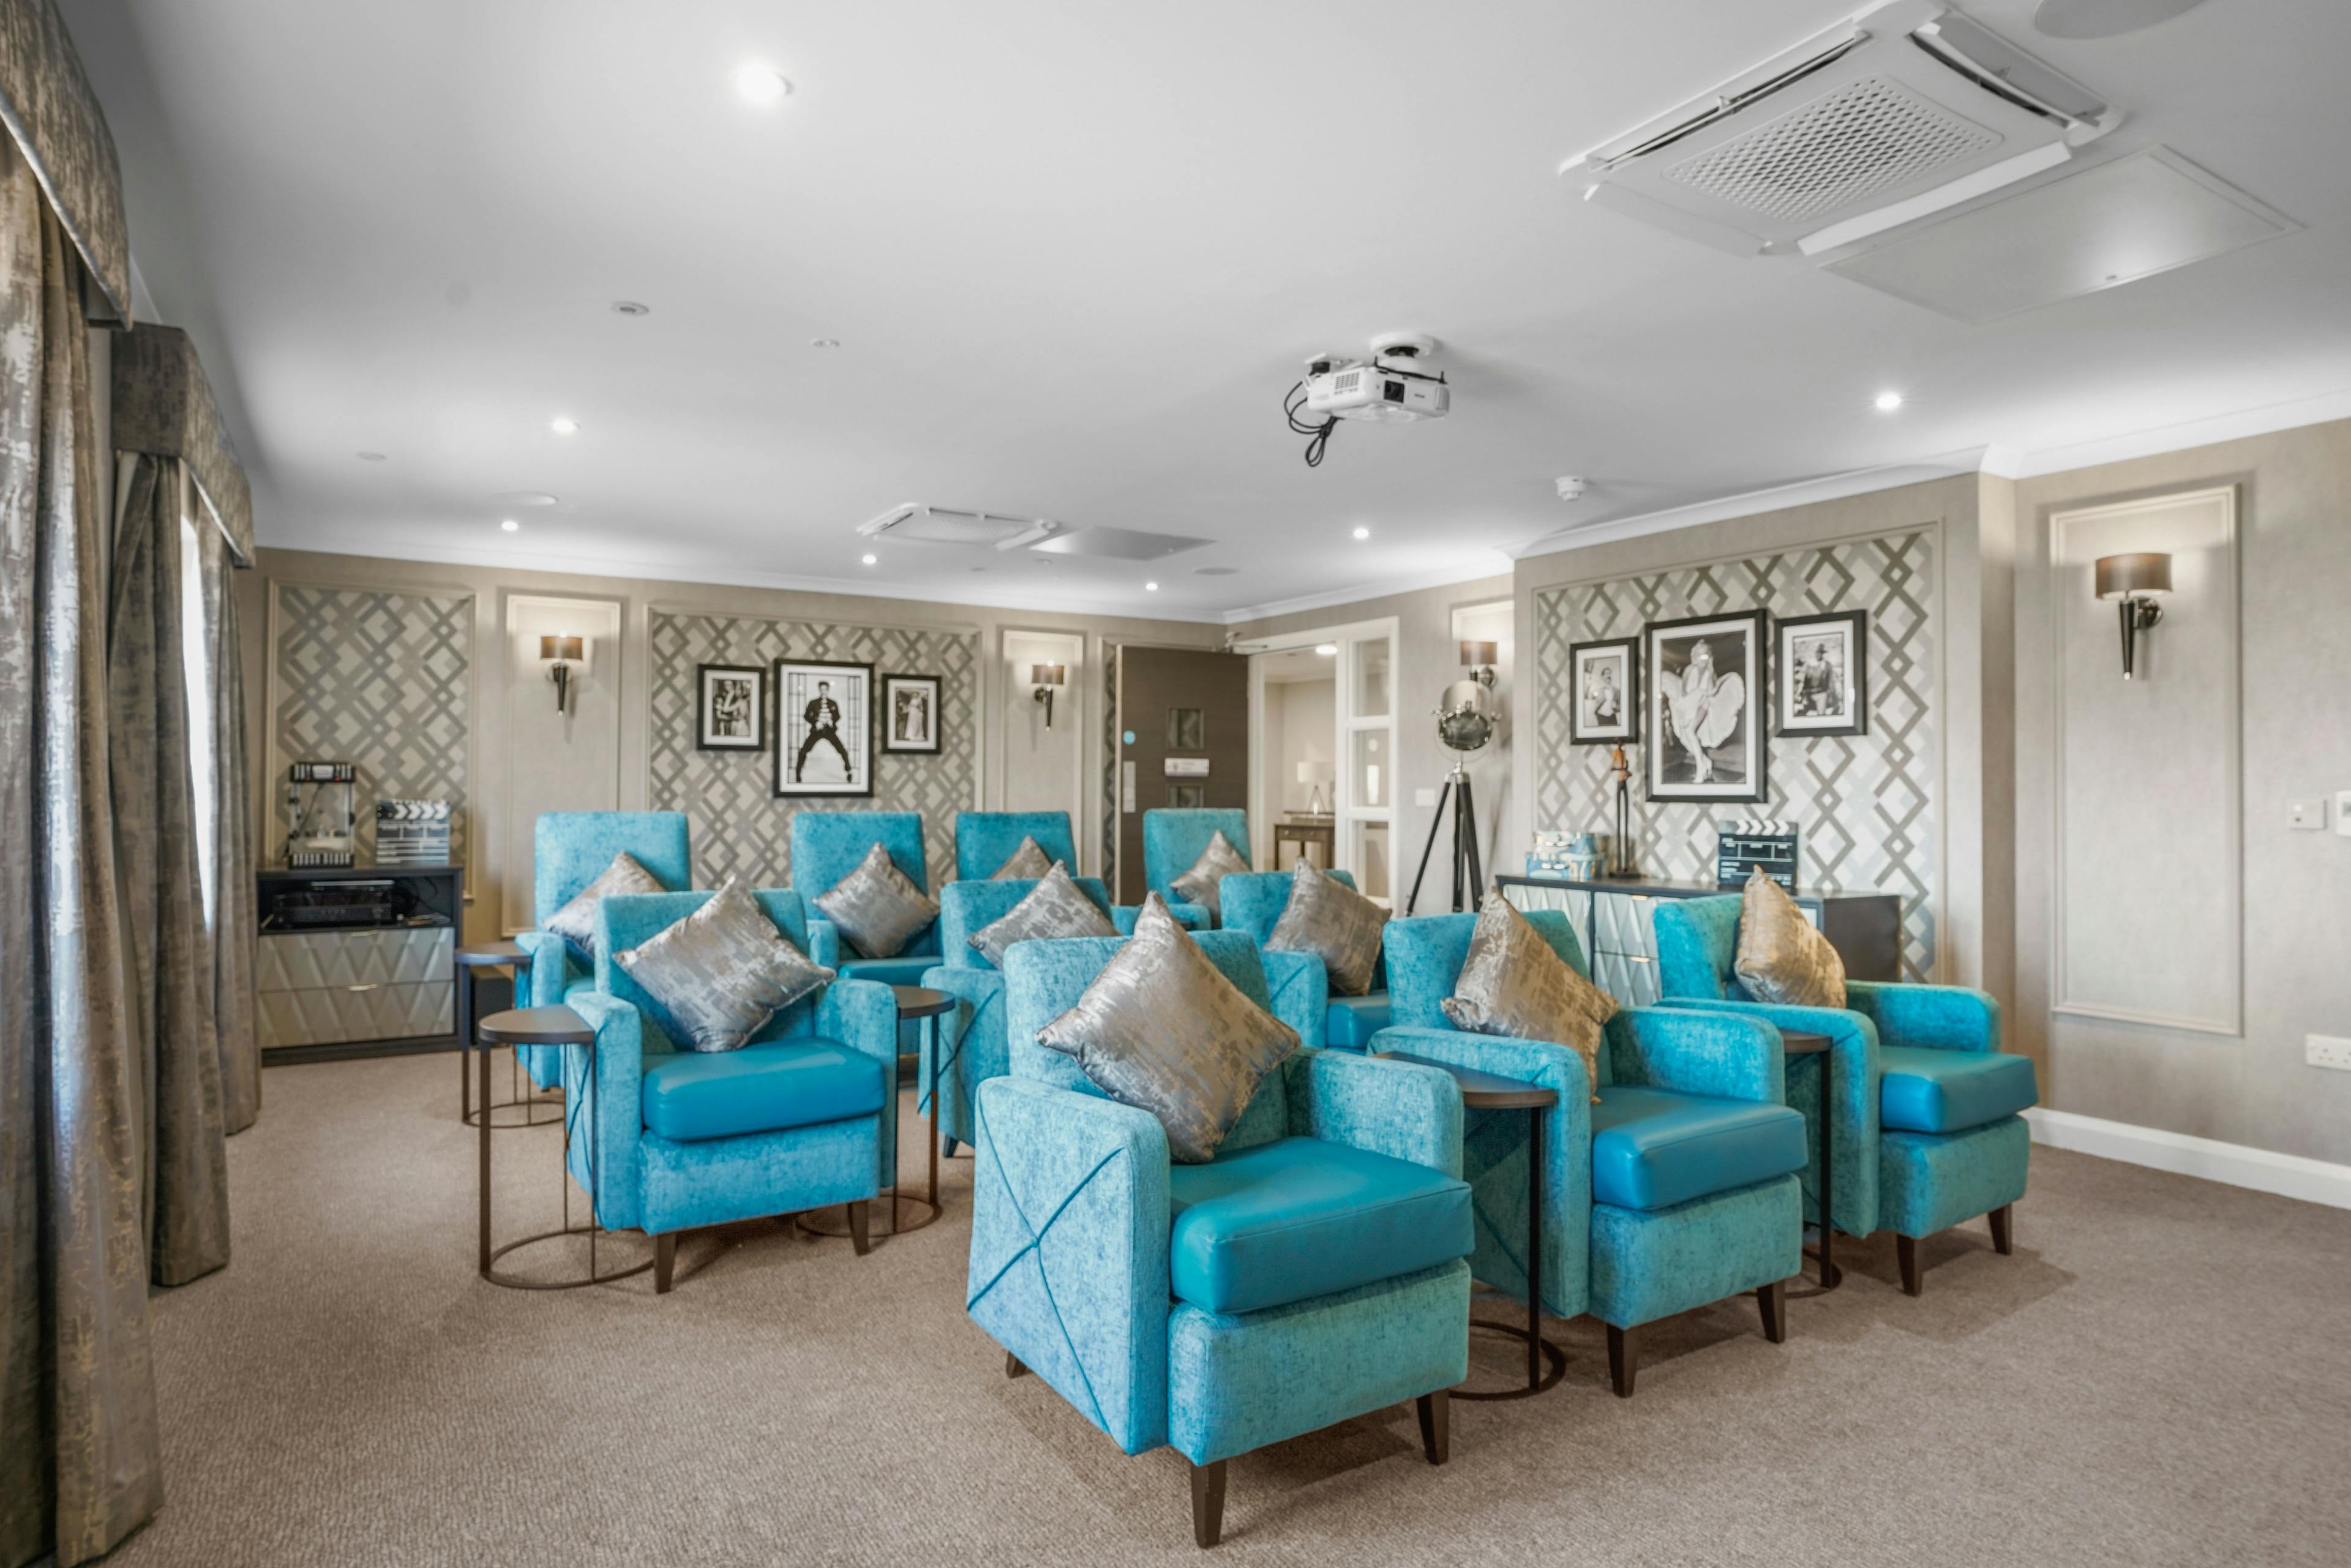 Cinema of Tanglewood care home in Horncastle, Lincolnshire